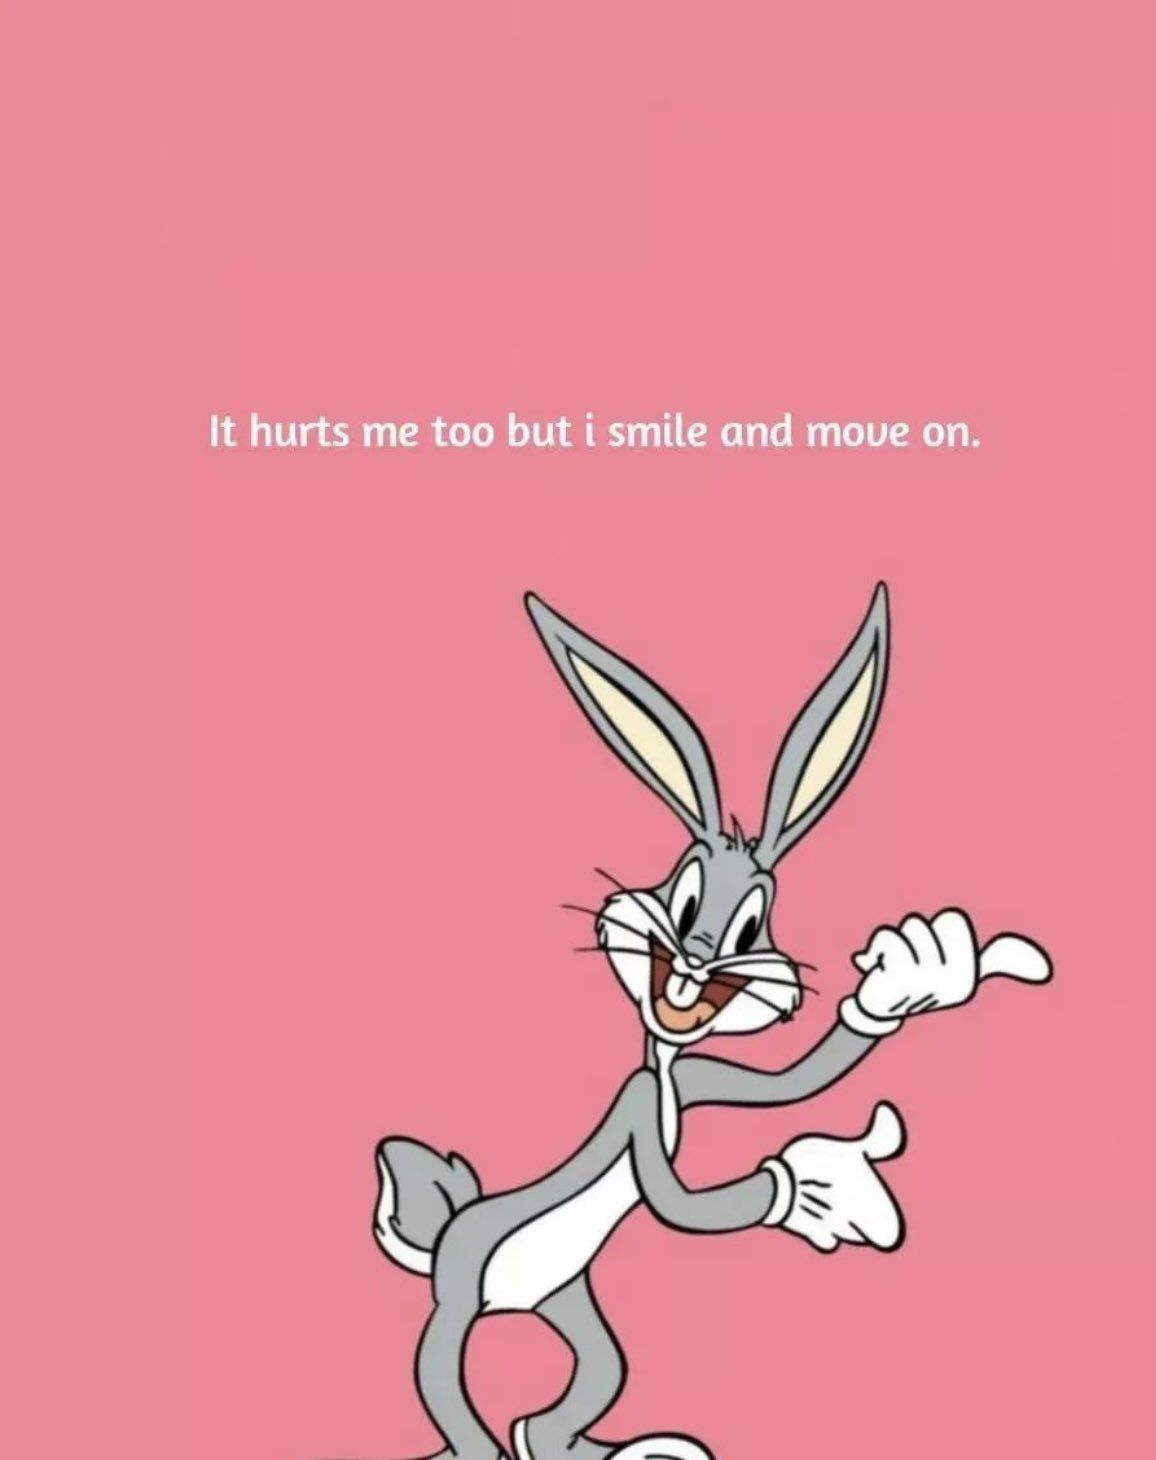 Bugs and daisy wallpaper - Bugs Bunny